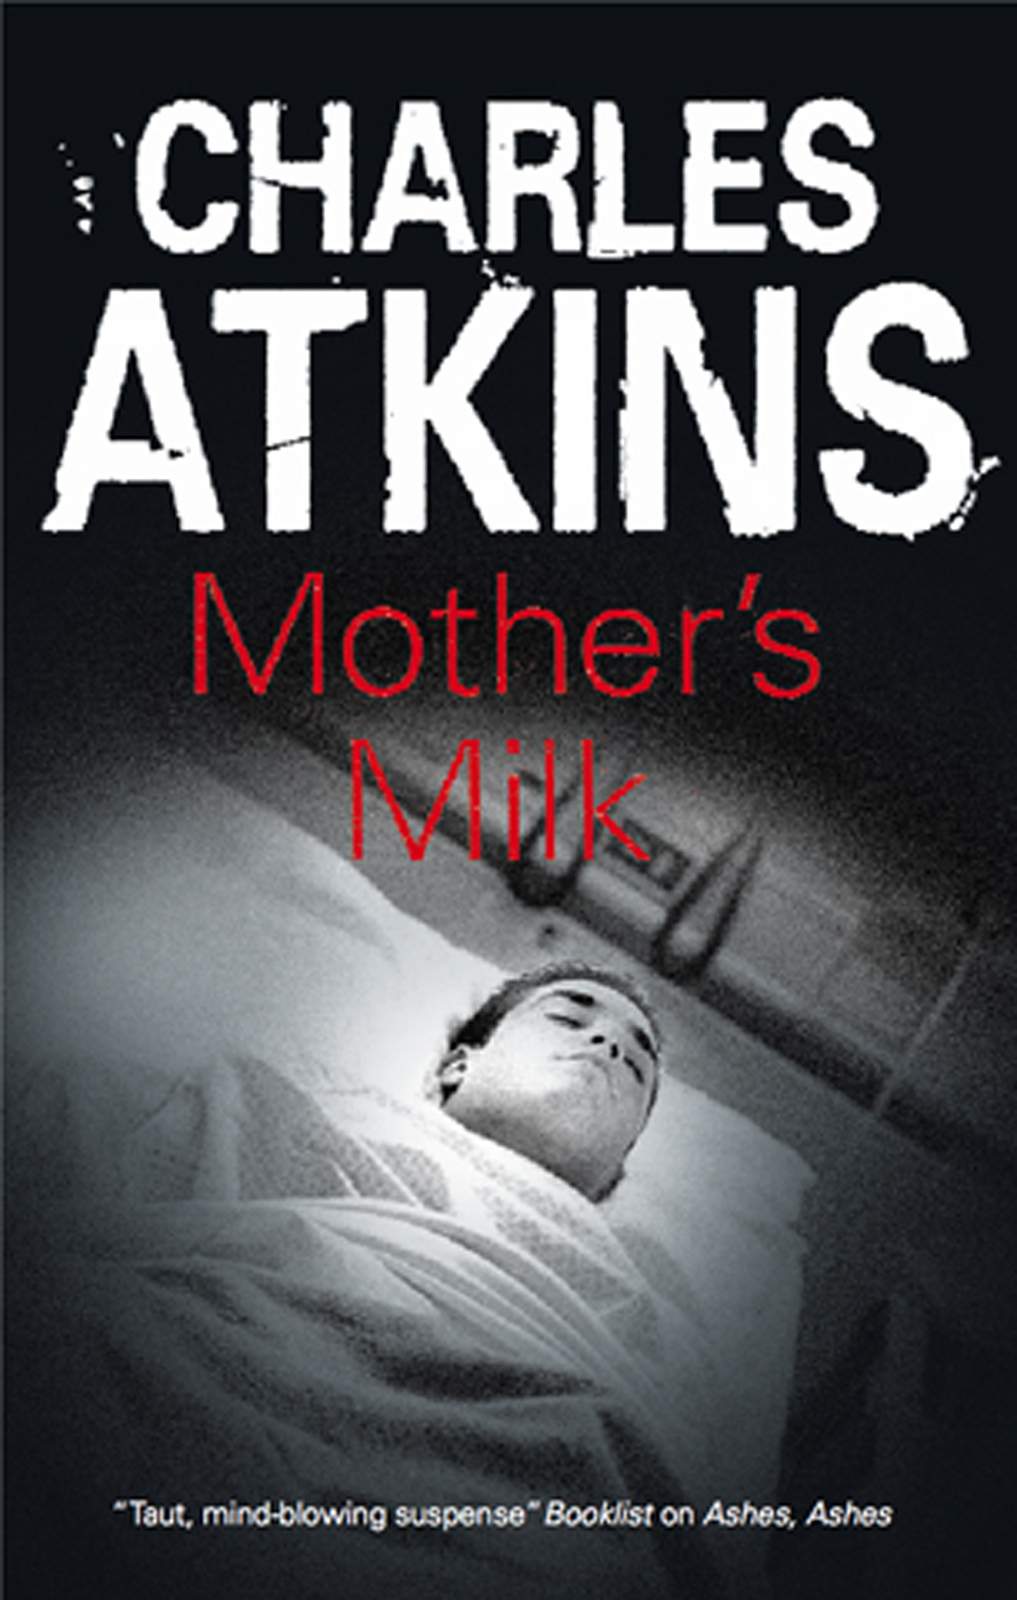 Mother's Milk (2014) by Charles Atkins